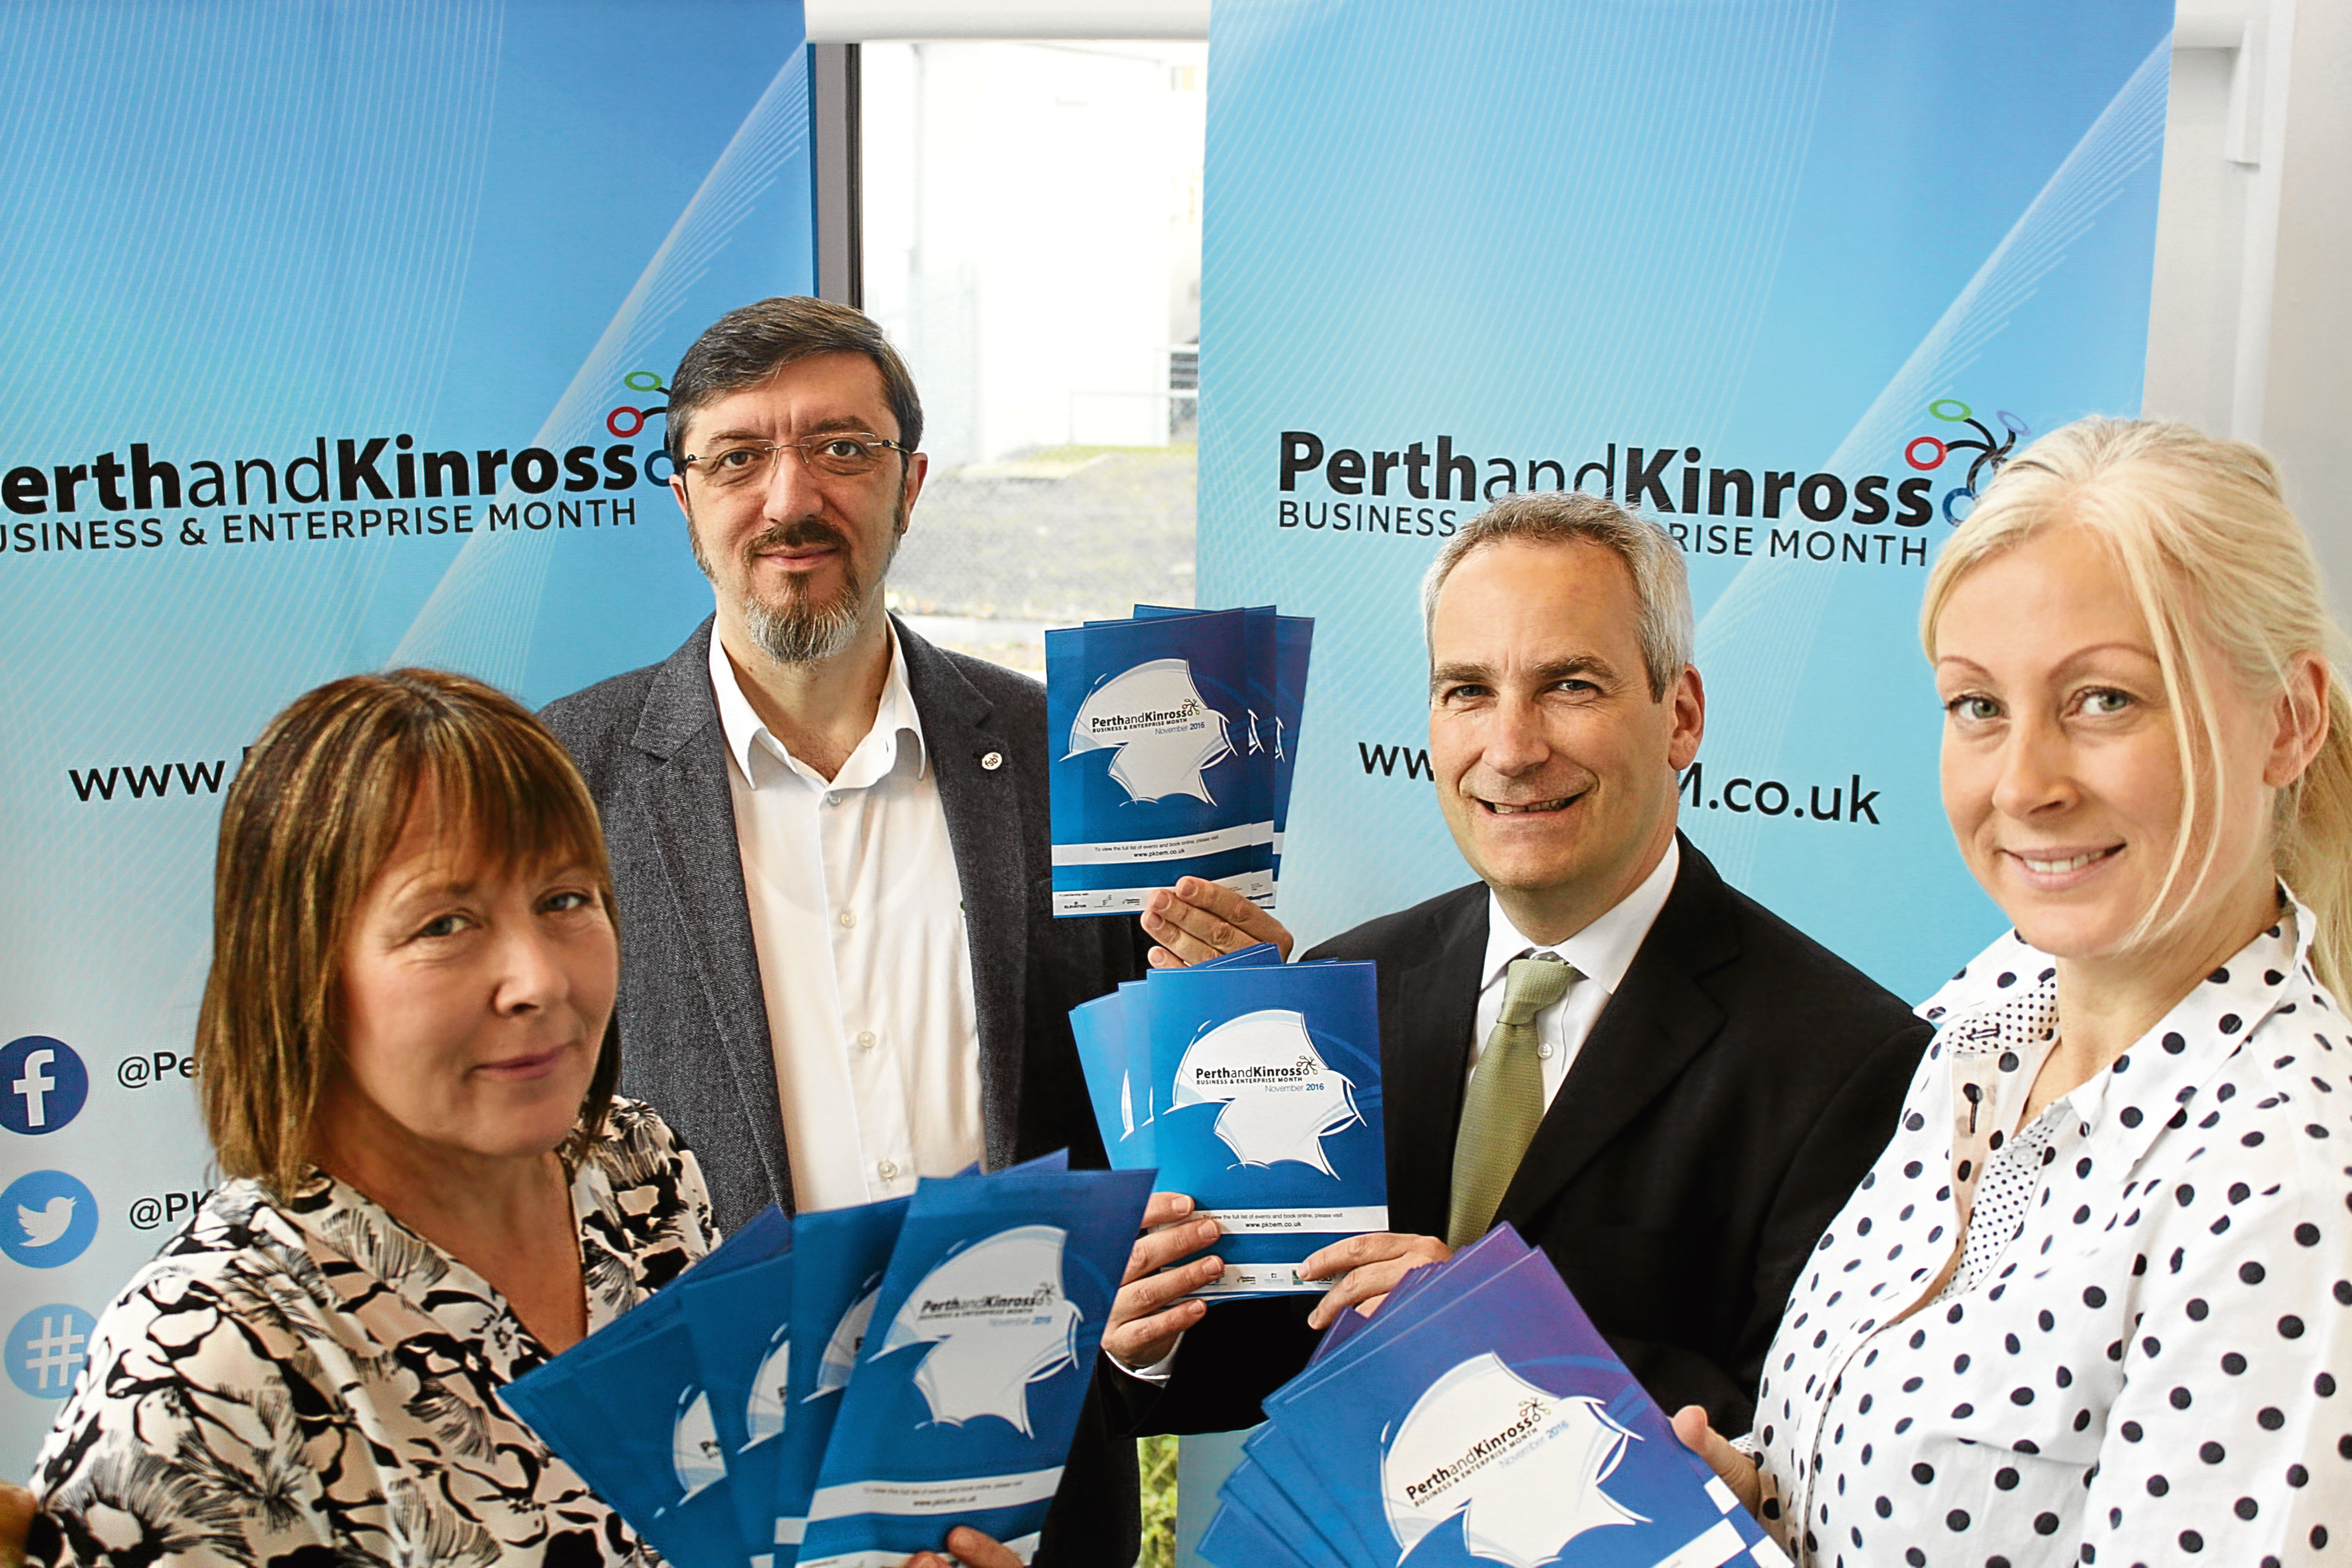 Lynne McCabe (Business Gateway), Corrado Mella (Federation of Small Businesses), Alan Graham (business development team leader, Perth and Kinross Council) and Vicki Unite (chief executive, Perthshire Chamber of Commerce).